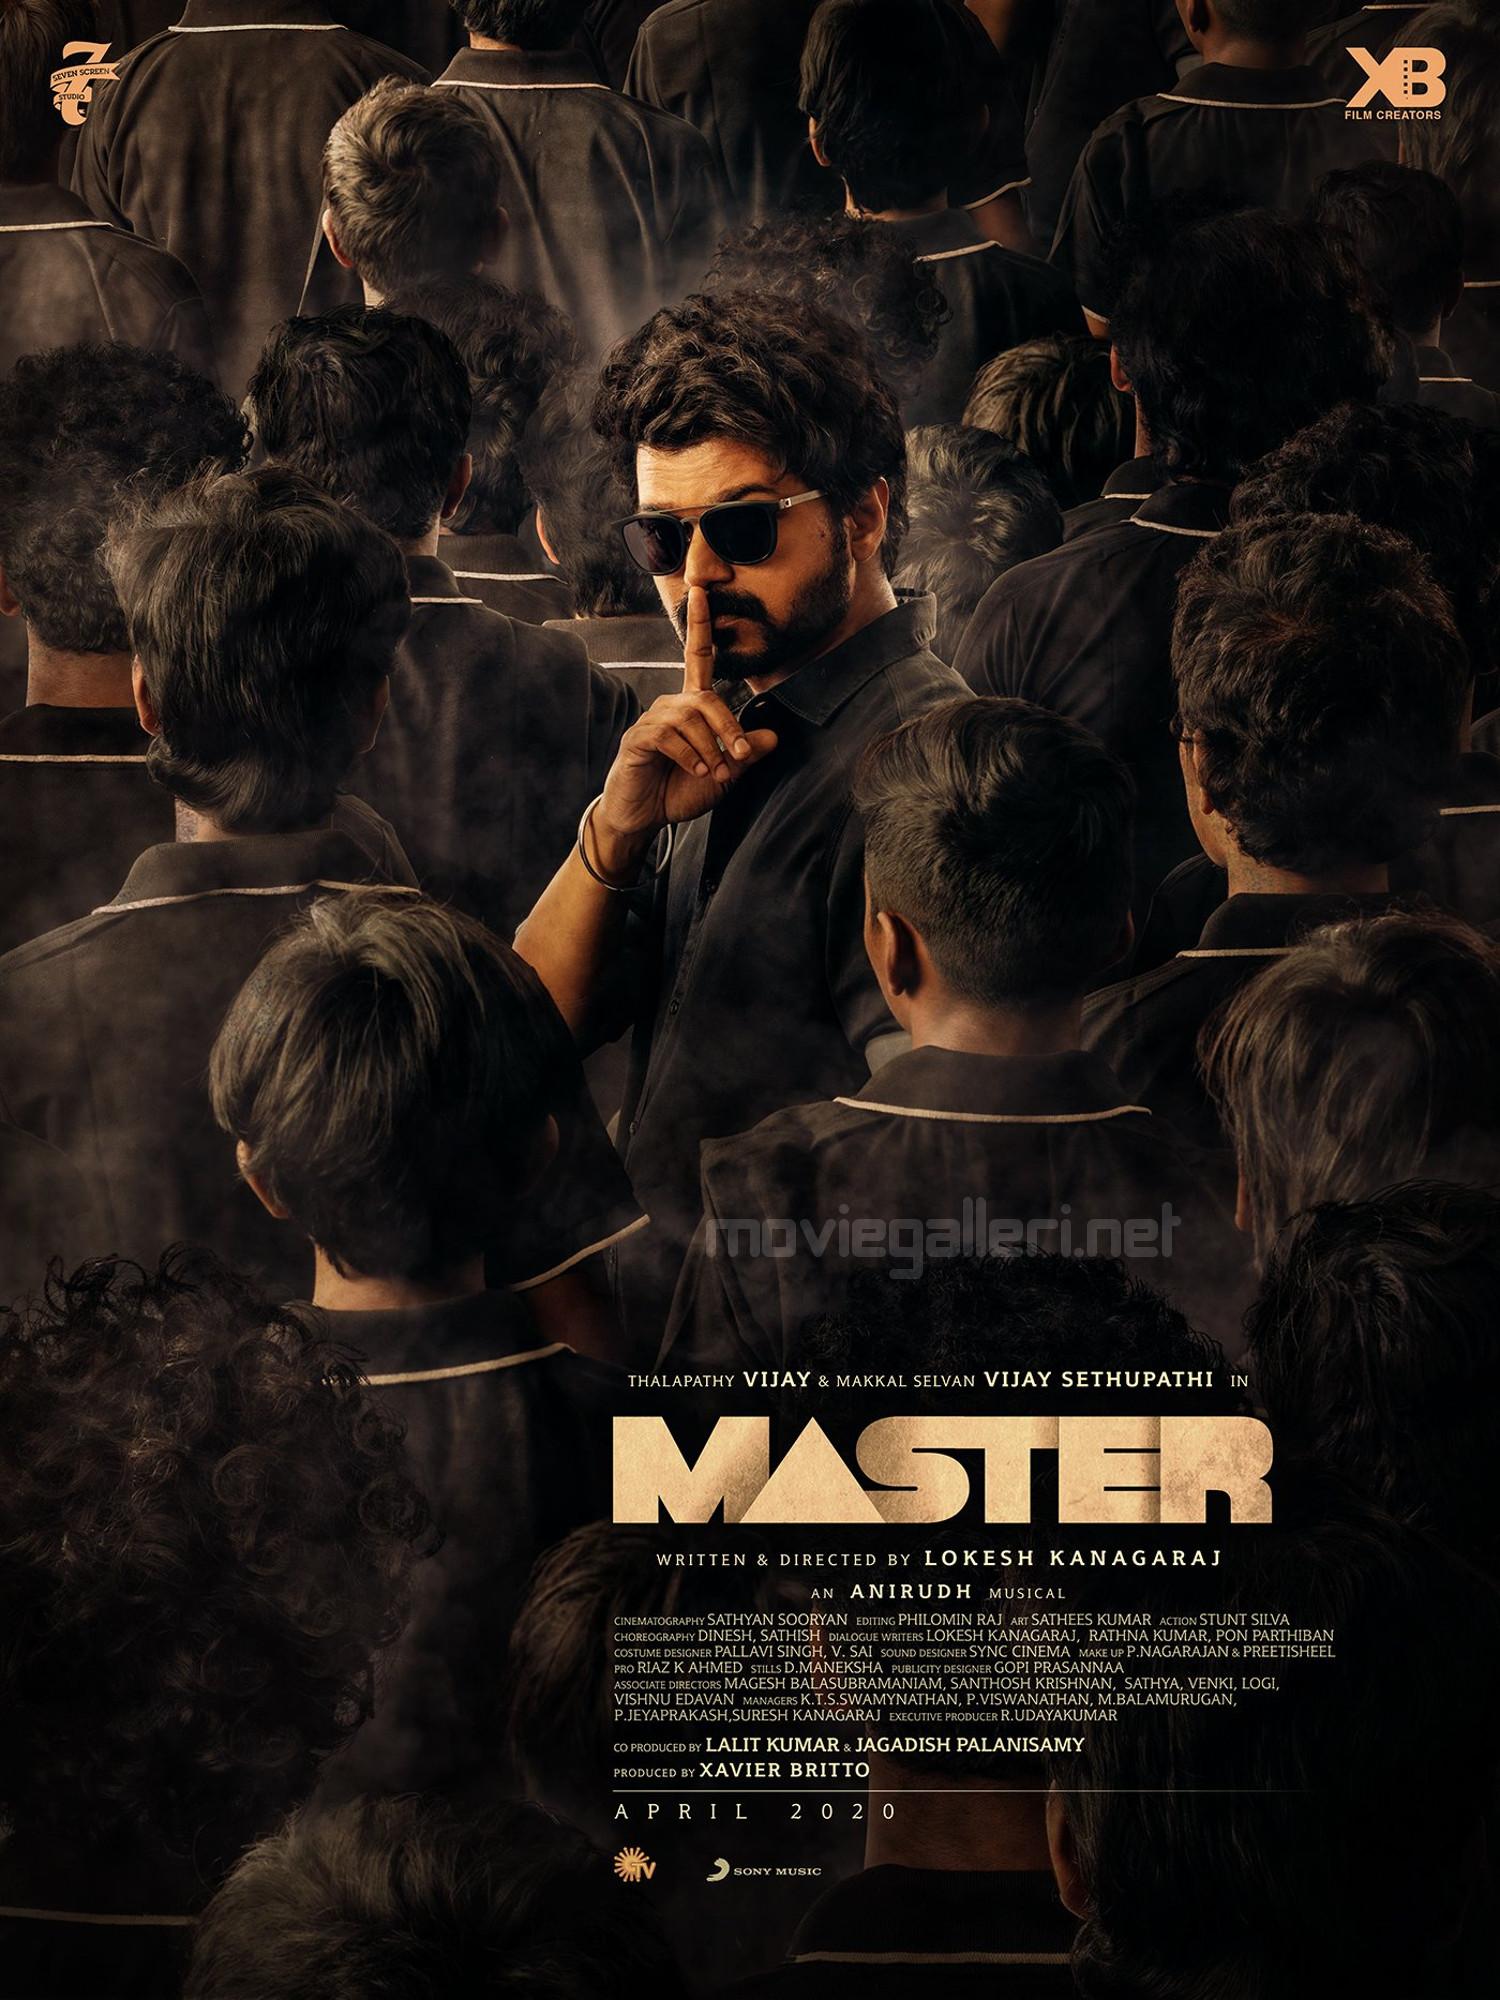 Vijay Master Movie Second Look Poster HD. New Movie Posters